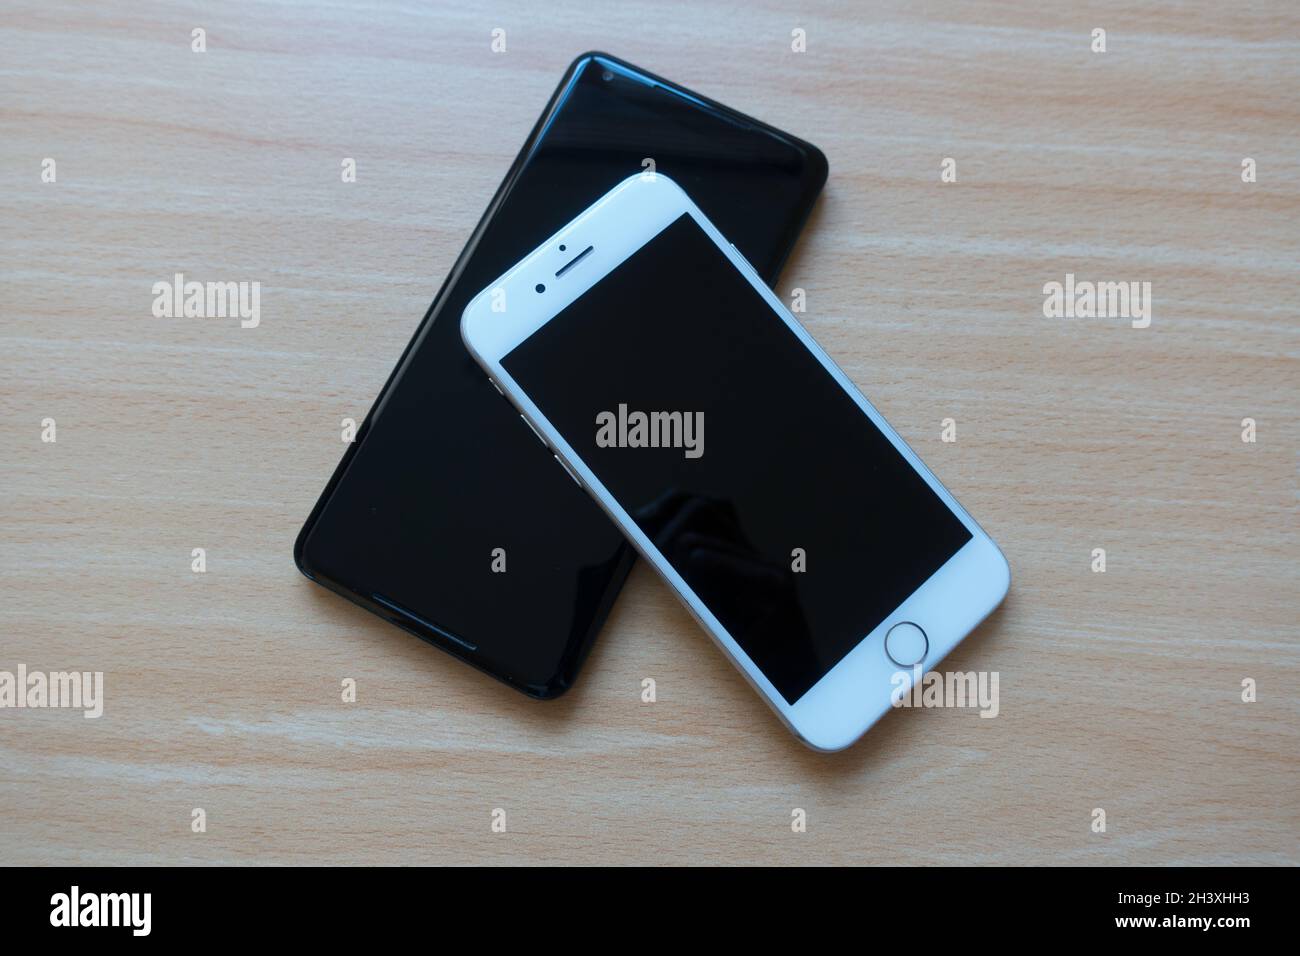 Android and Apple smart phone placed next to each other on a table Stock Photo